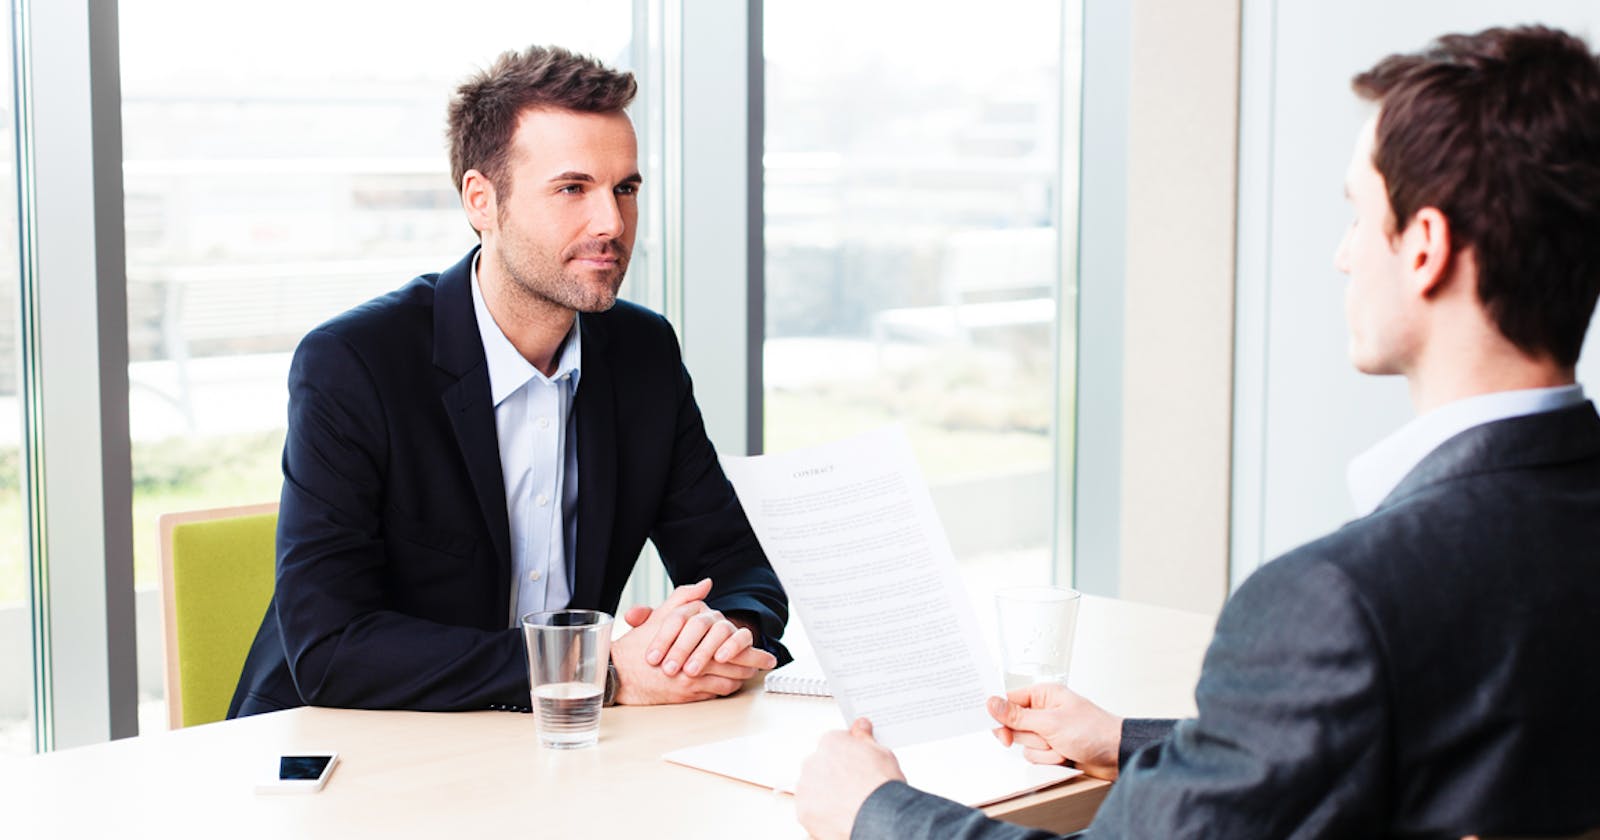 7 things you should never do during an interview